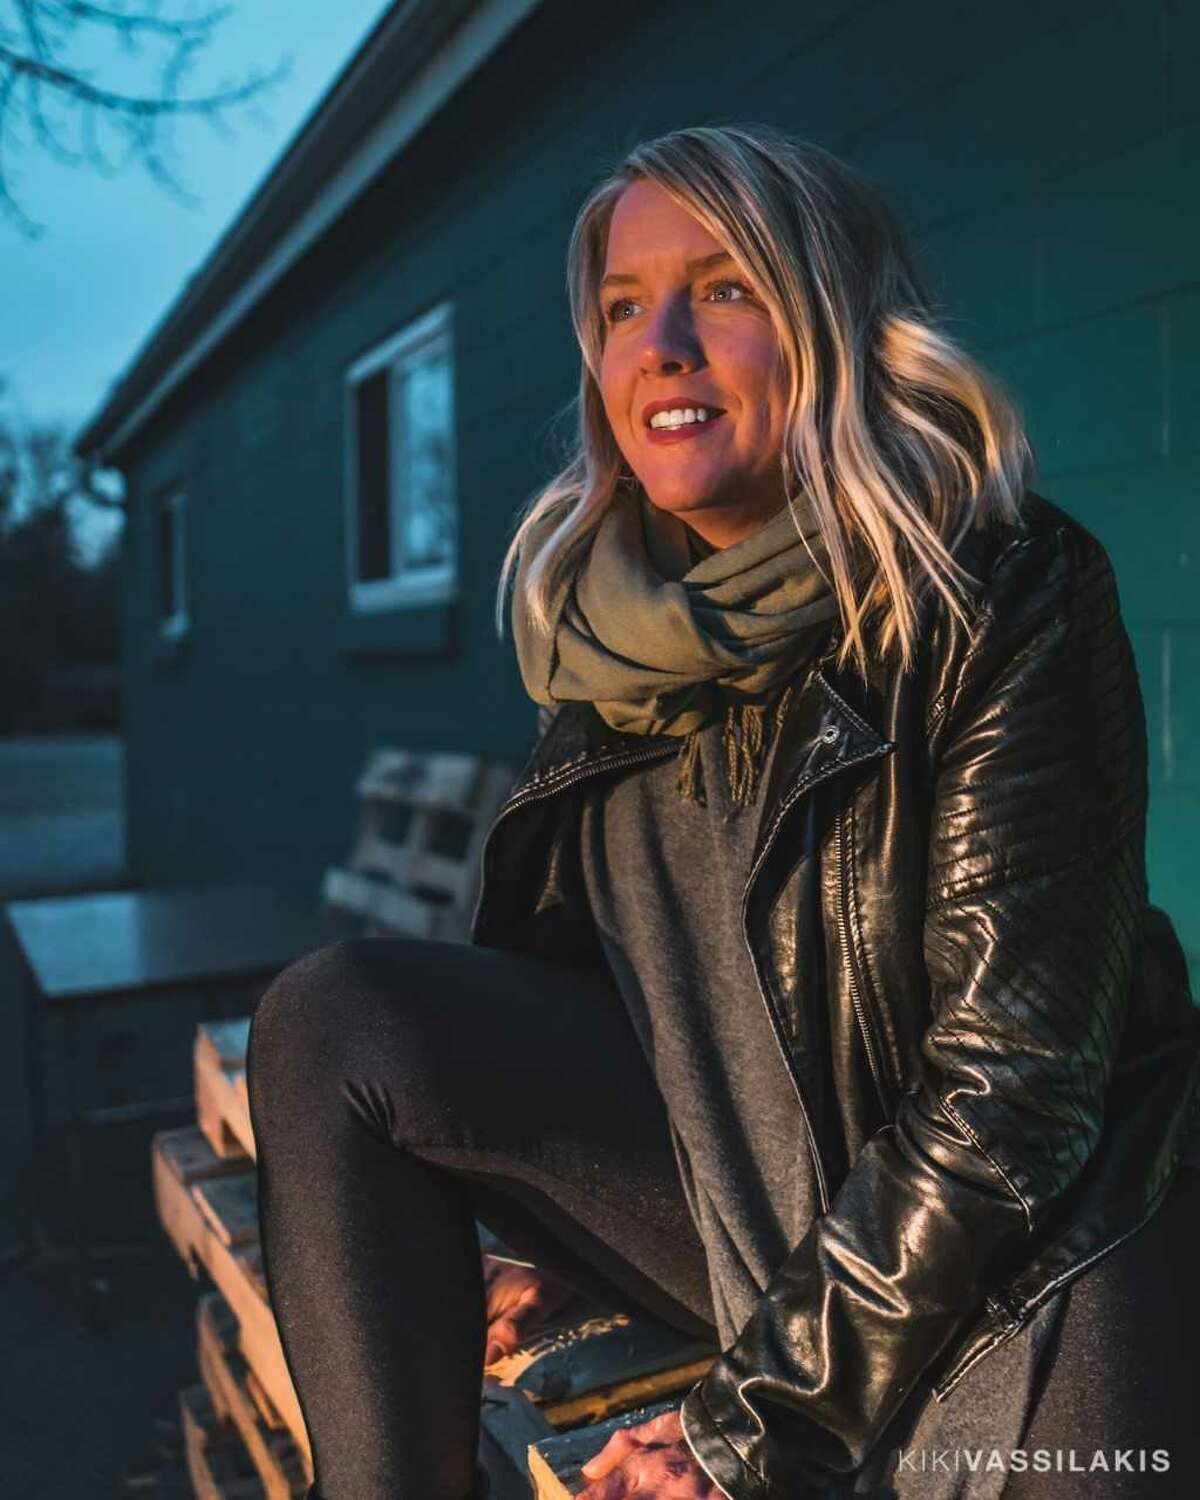 Singer/songwriter/comedian Erin Harkes is planning to stay close to home with a new gig at Funny Bone Comedy Club. Keep clicking for local musicians who have made it big.